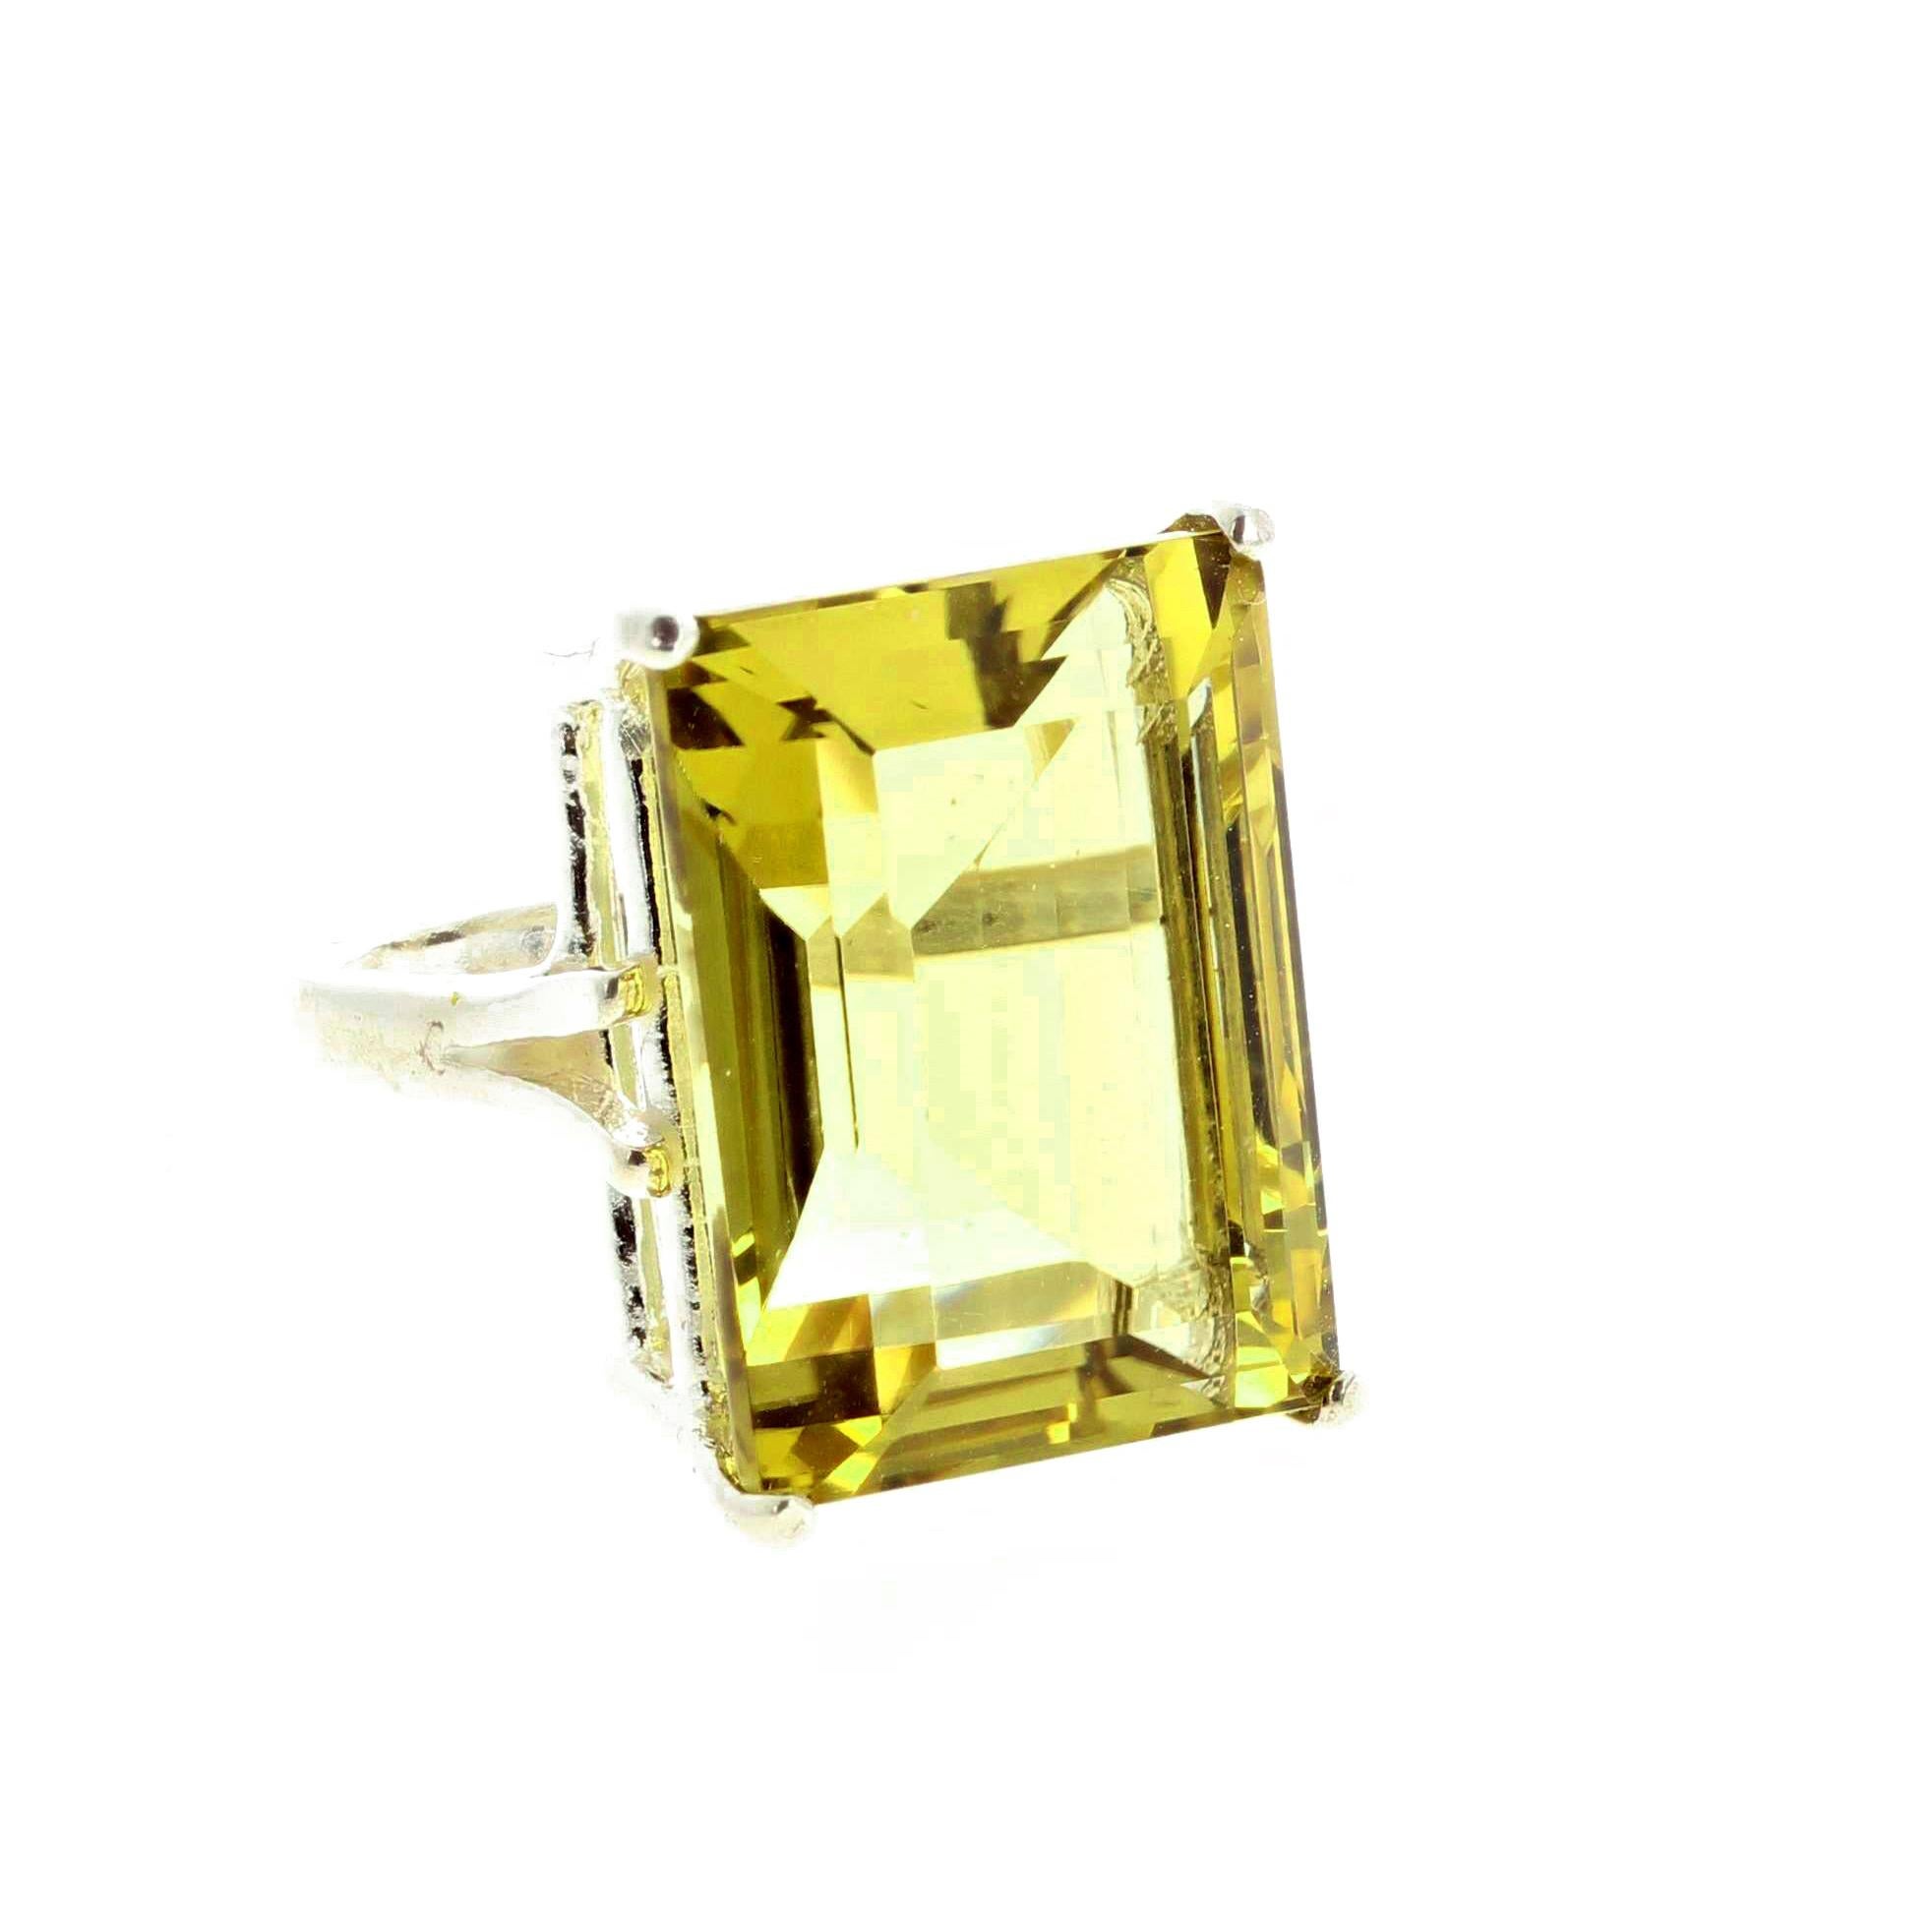 20 Carat glistening unique huge Lemon Quartz (20 mm x 15 mm) set in a sterling silver ring size 7 (sizable).  More from this seller by entering gemjunky in your 1stdibs search bar.